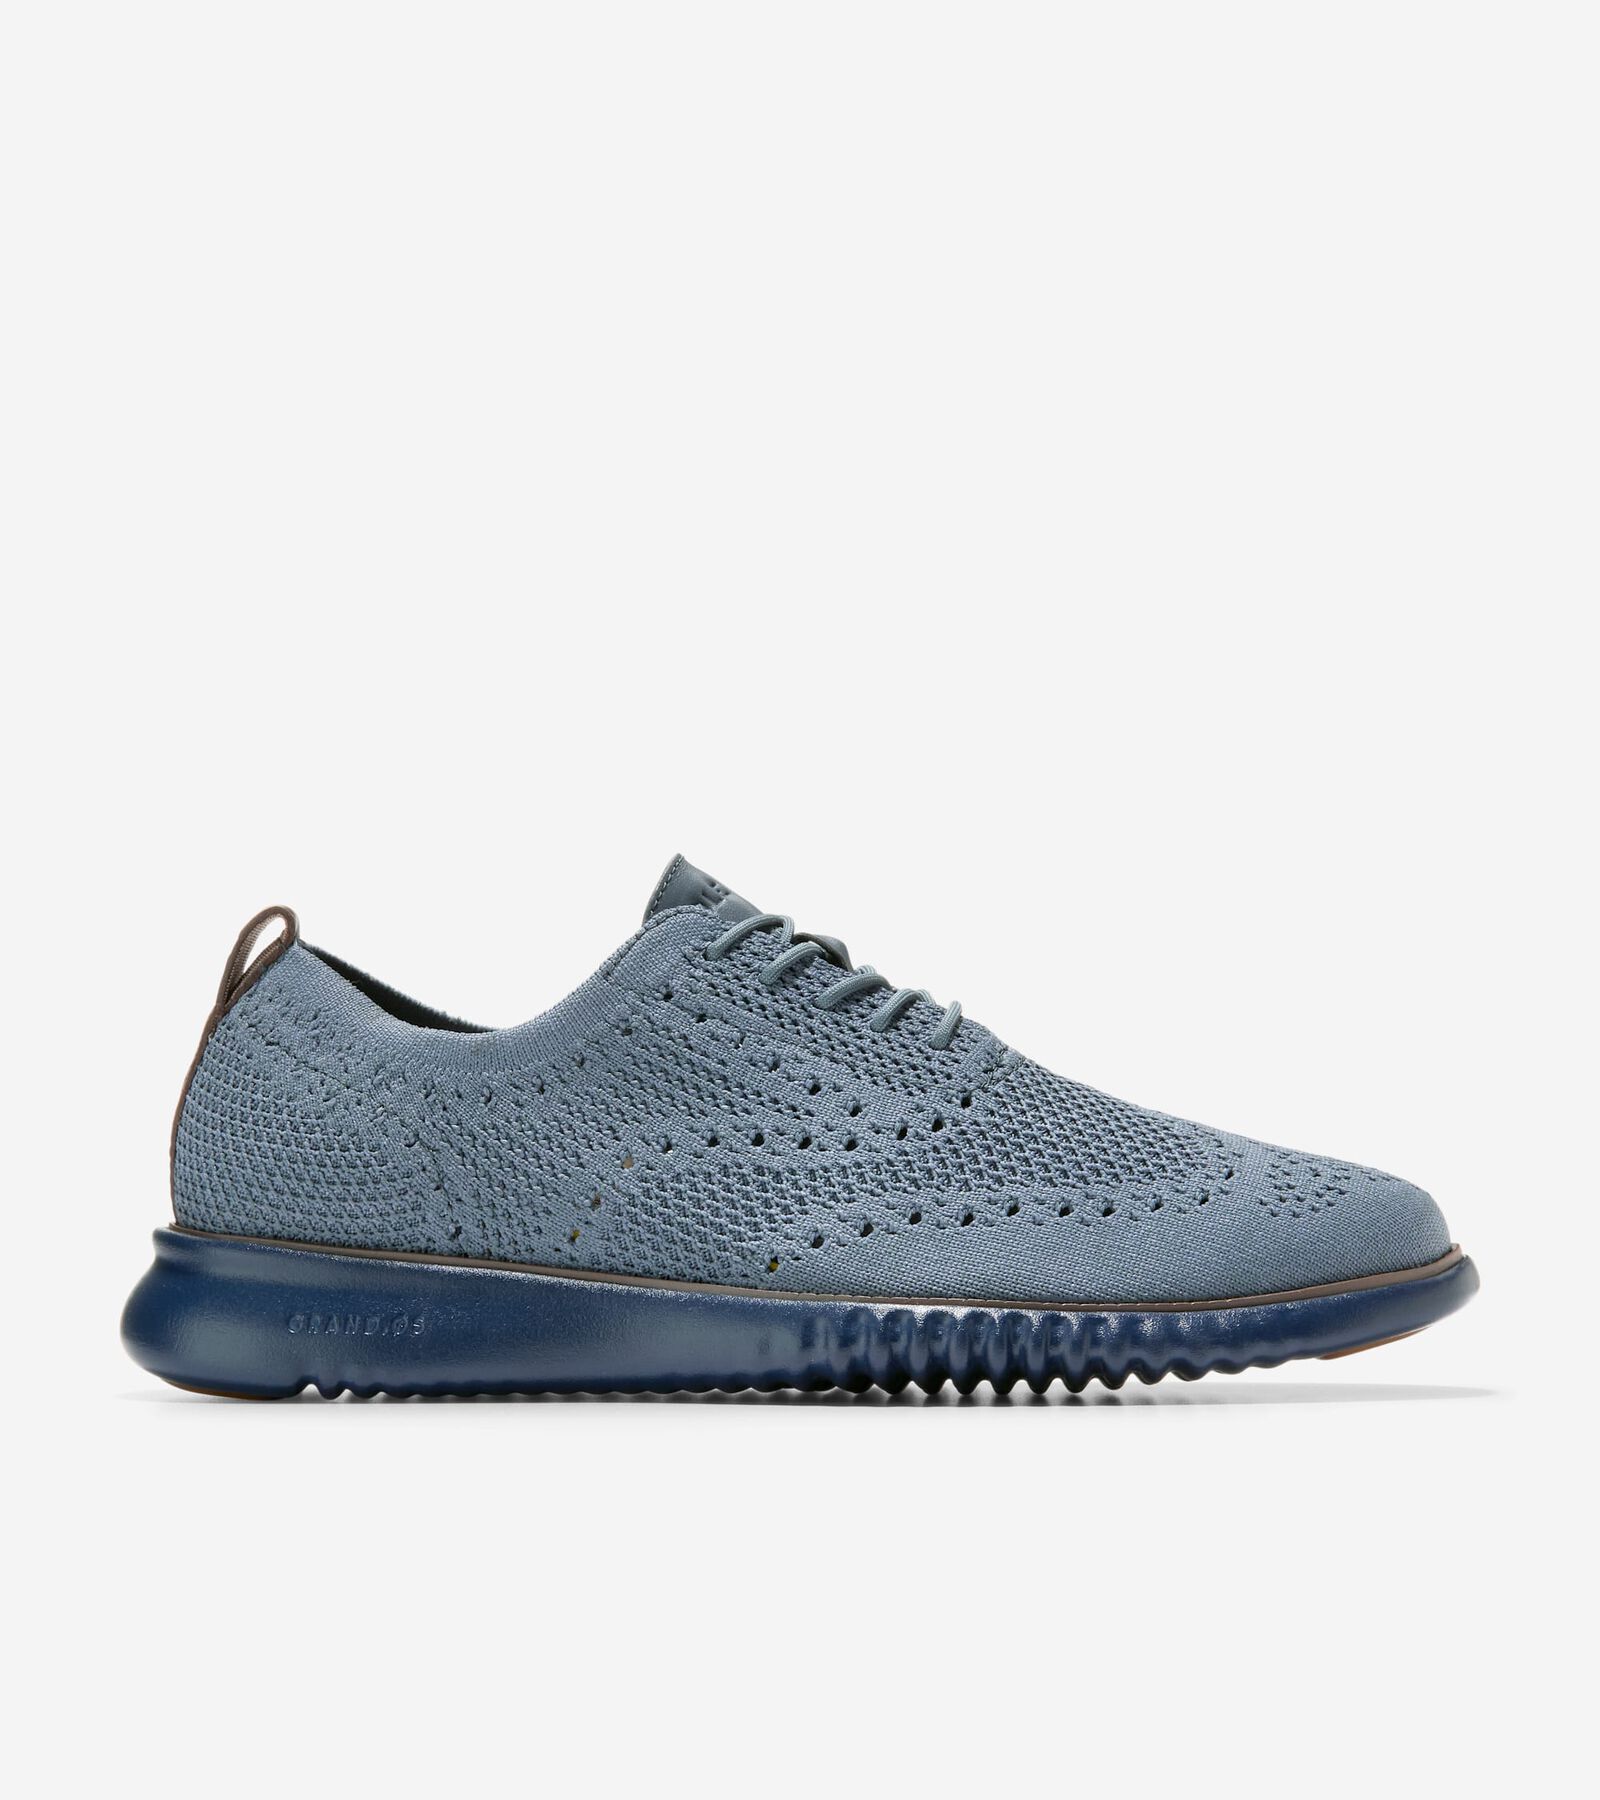 Cole Haan Men's 2.ZERØGRAND Wingtip Oxford - Stormy Weather-Blue Wing Teal - Size: 10.5